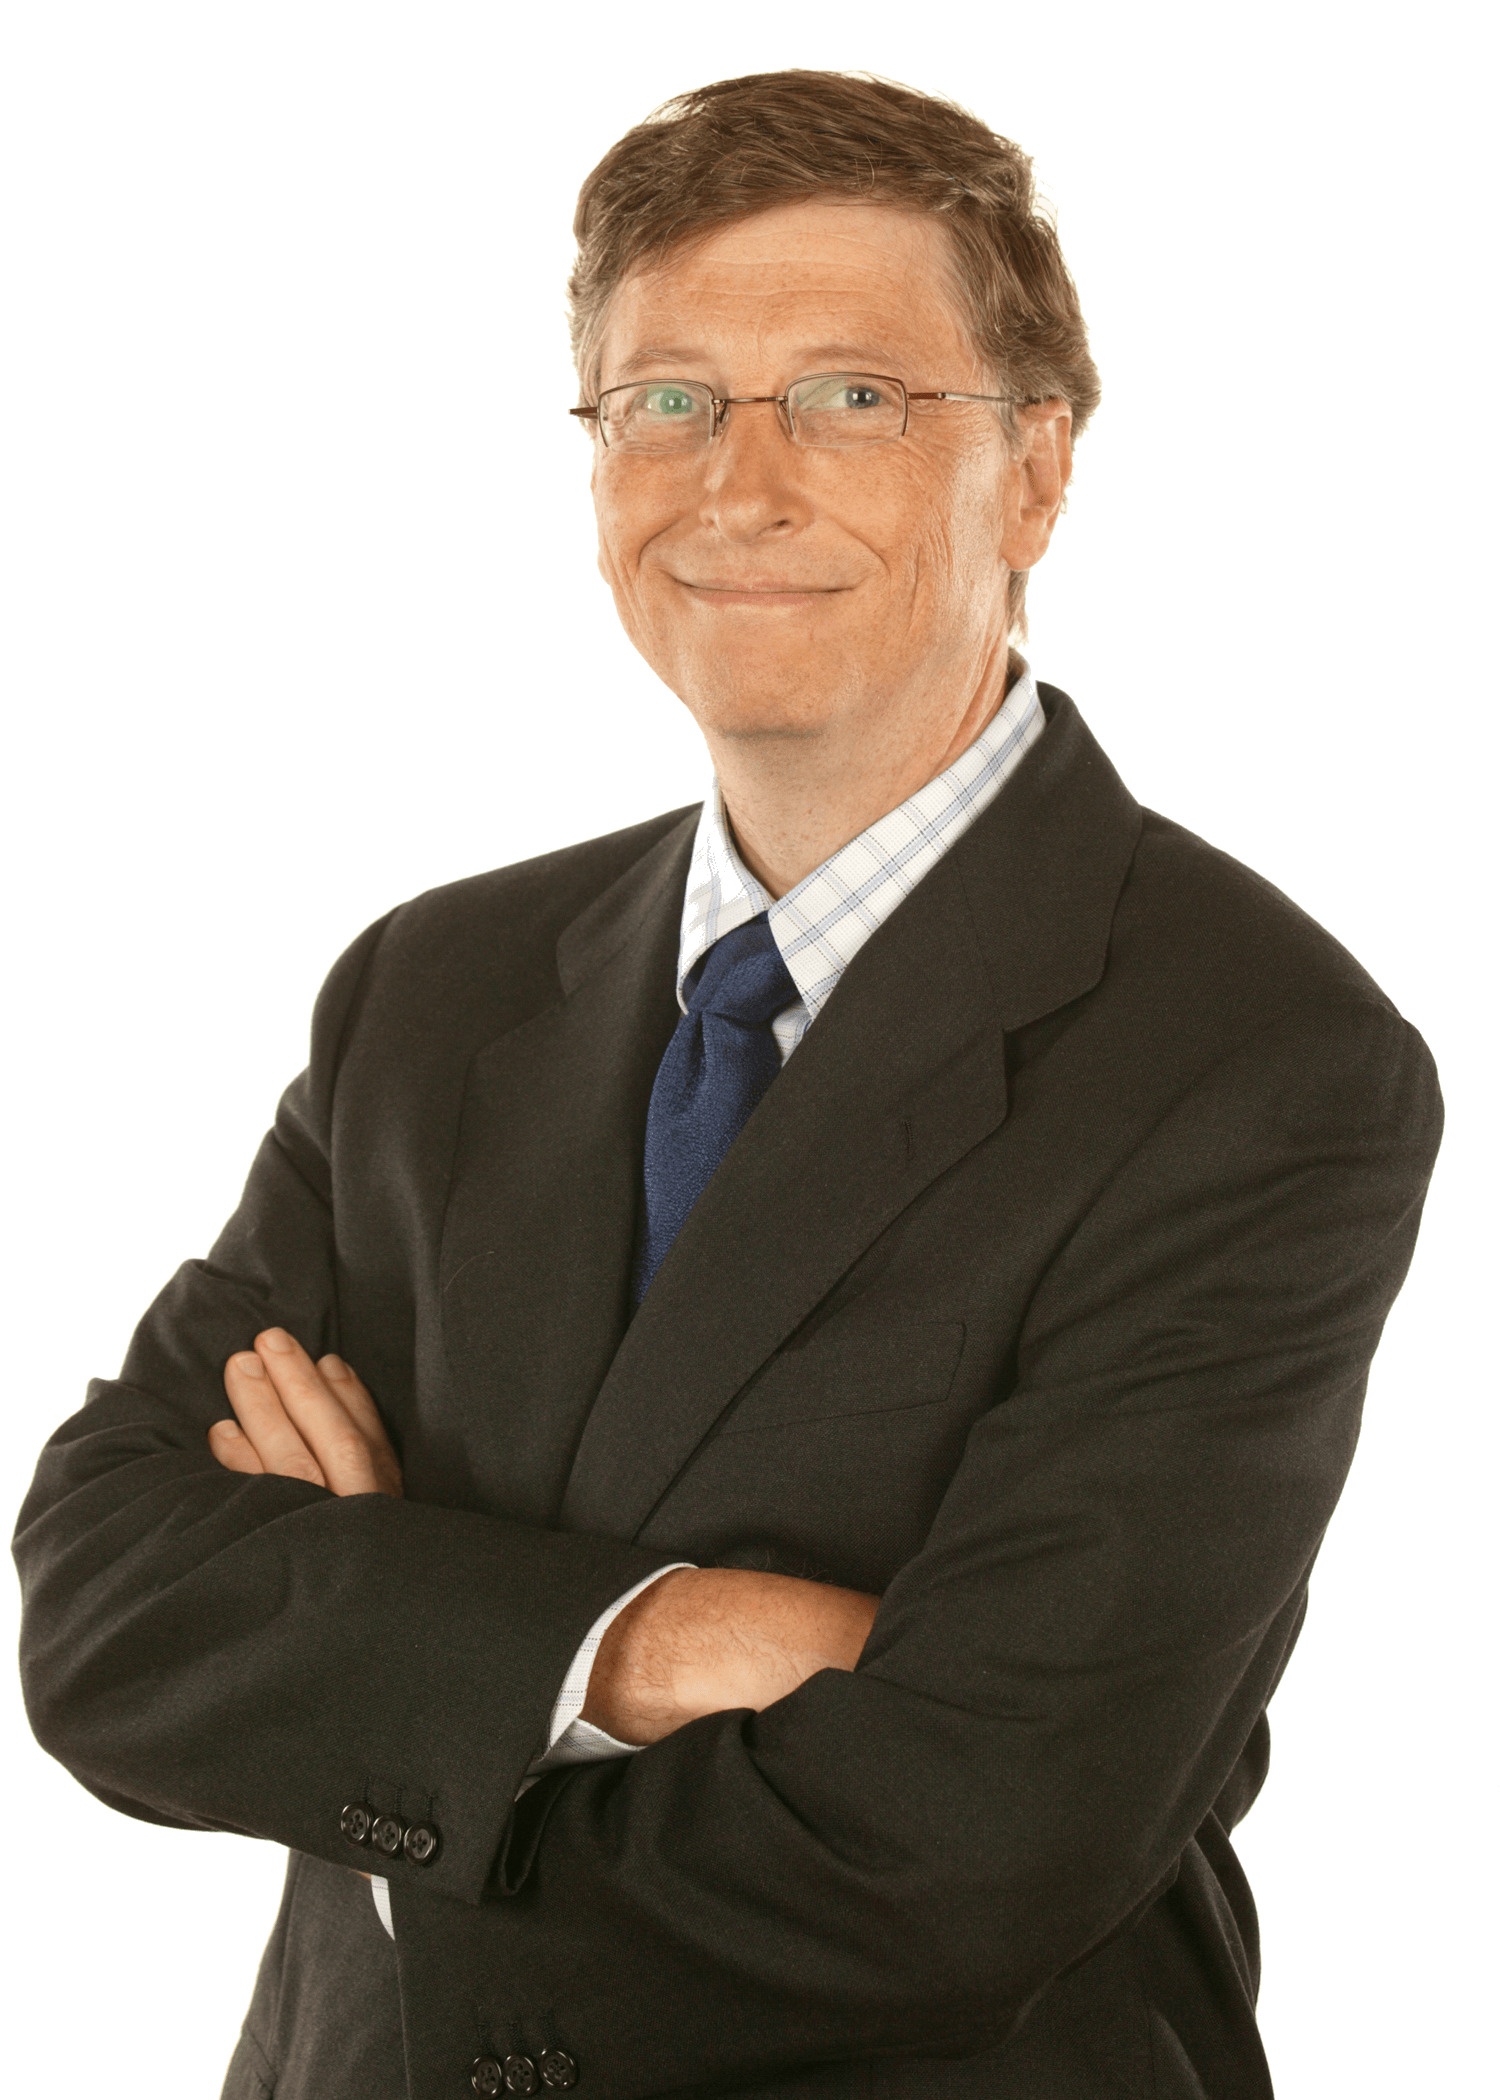 Bill Gates Suit png icons